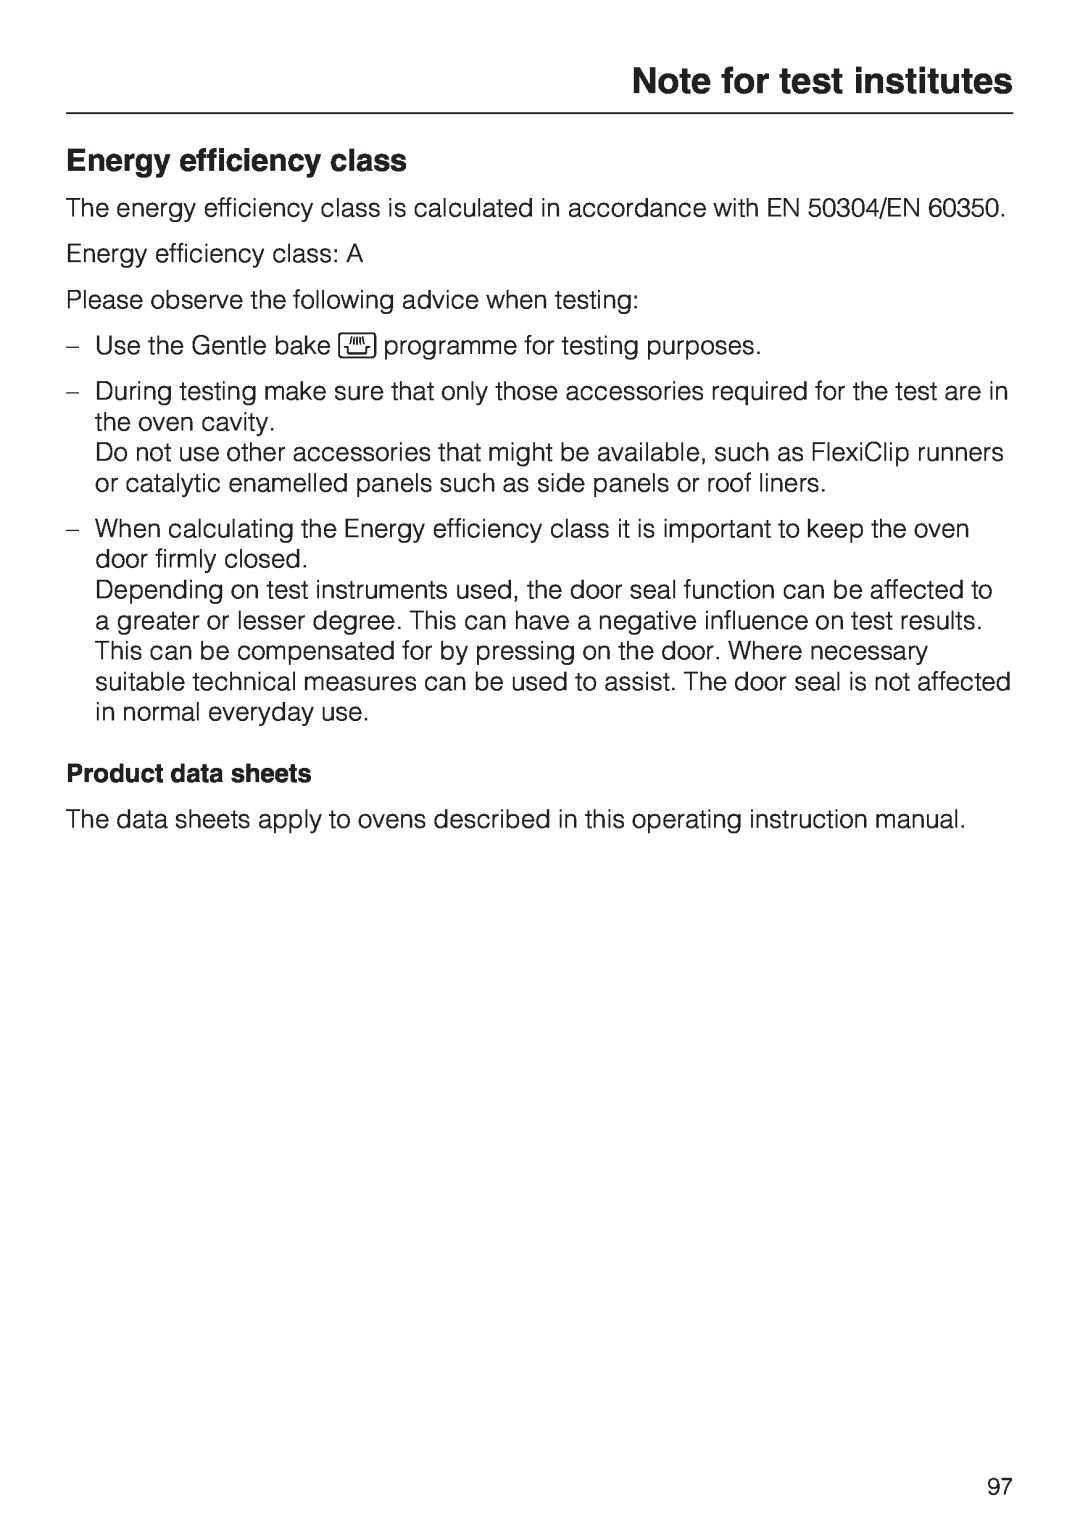 Miele 10 102 470 installation instructions Energy efficiency class, Note for test institutes, Product data sheets 